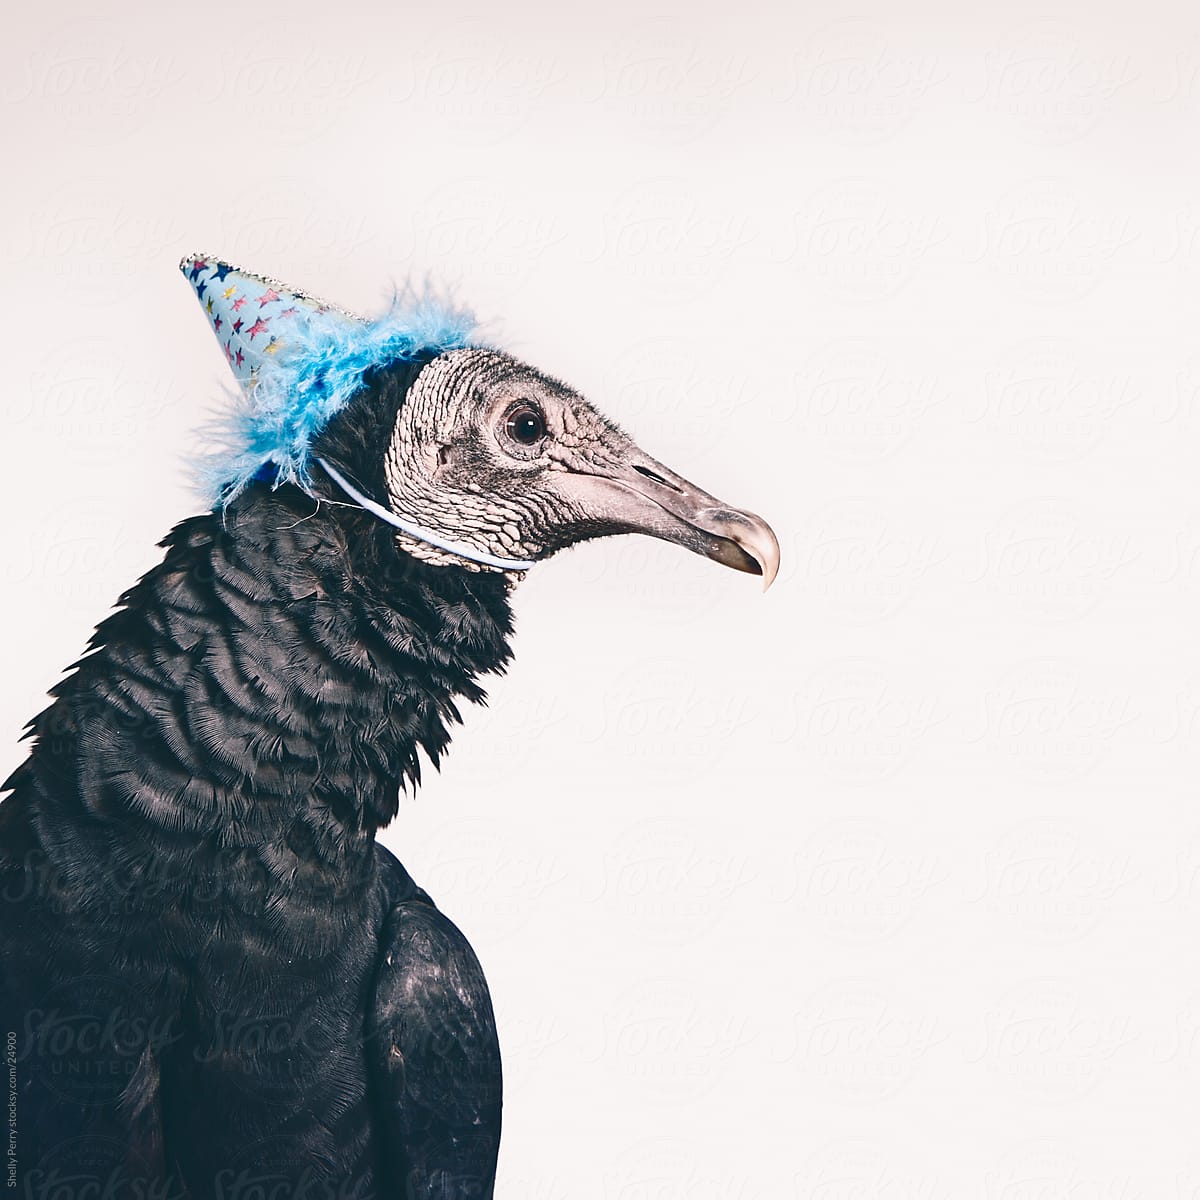 Studio Shot of a Vulture in a Party Hat